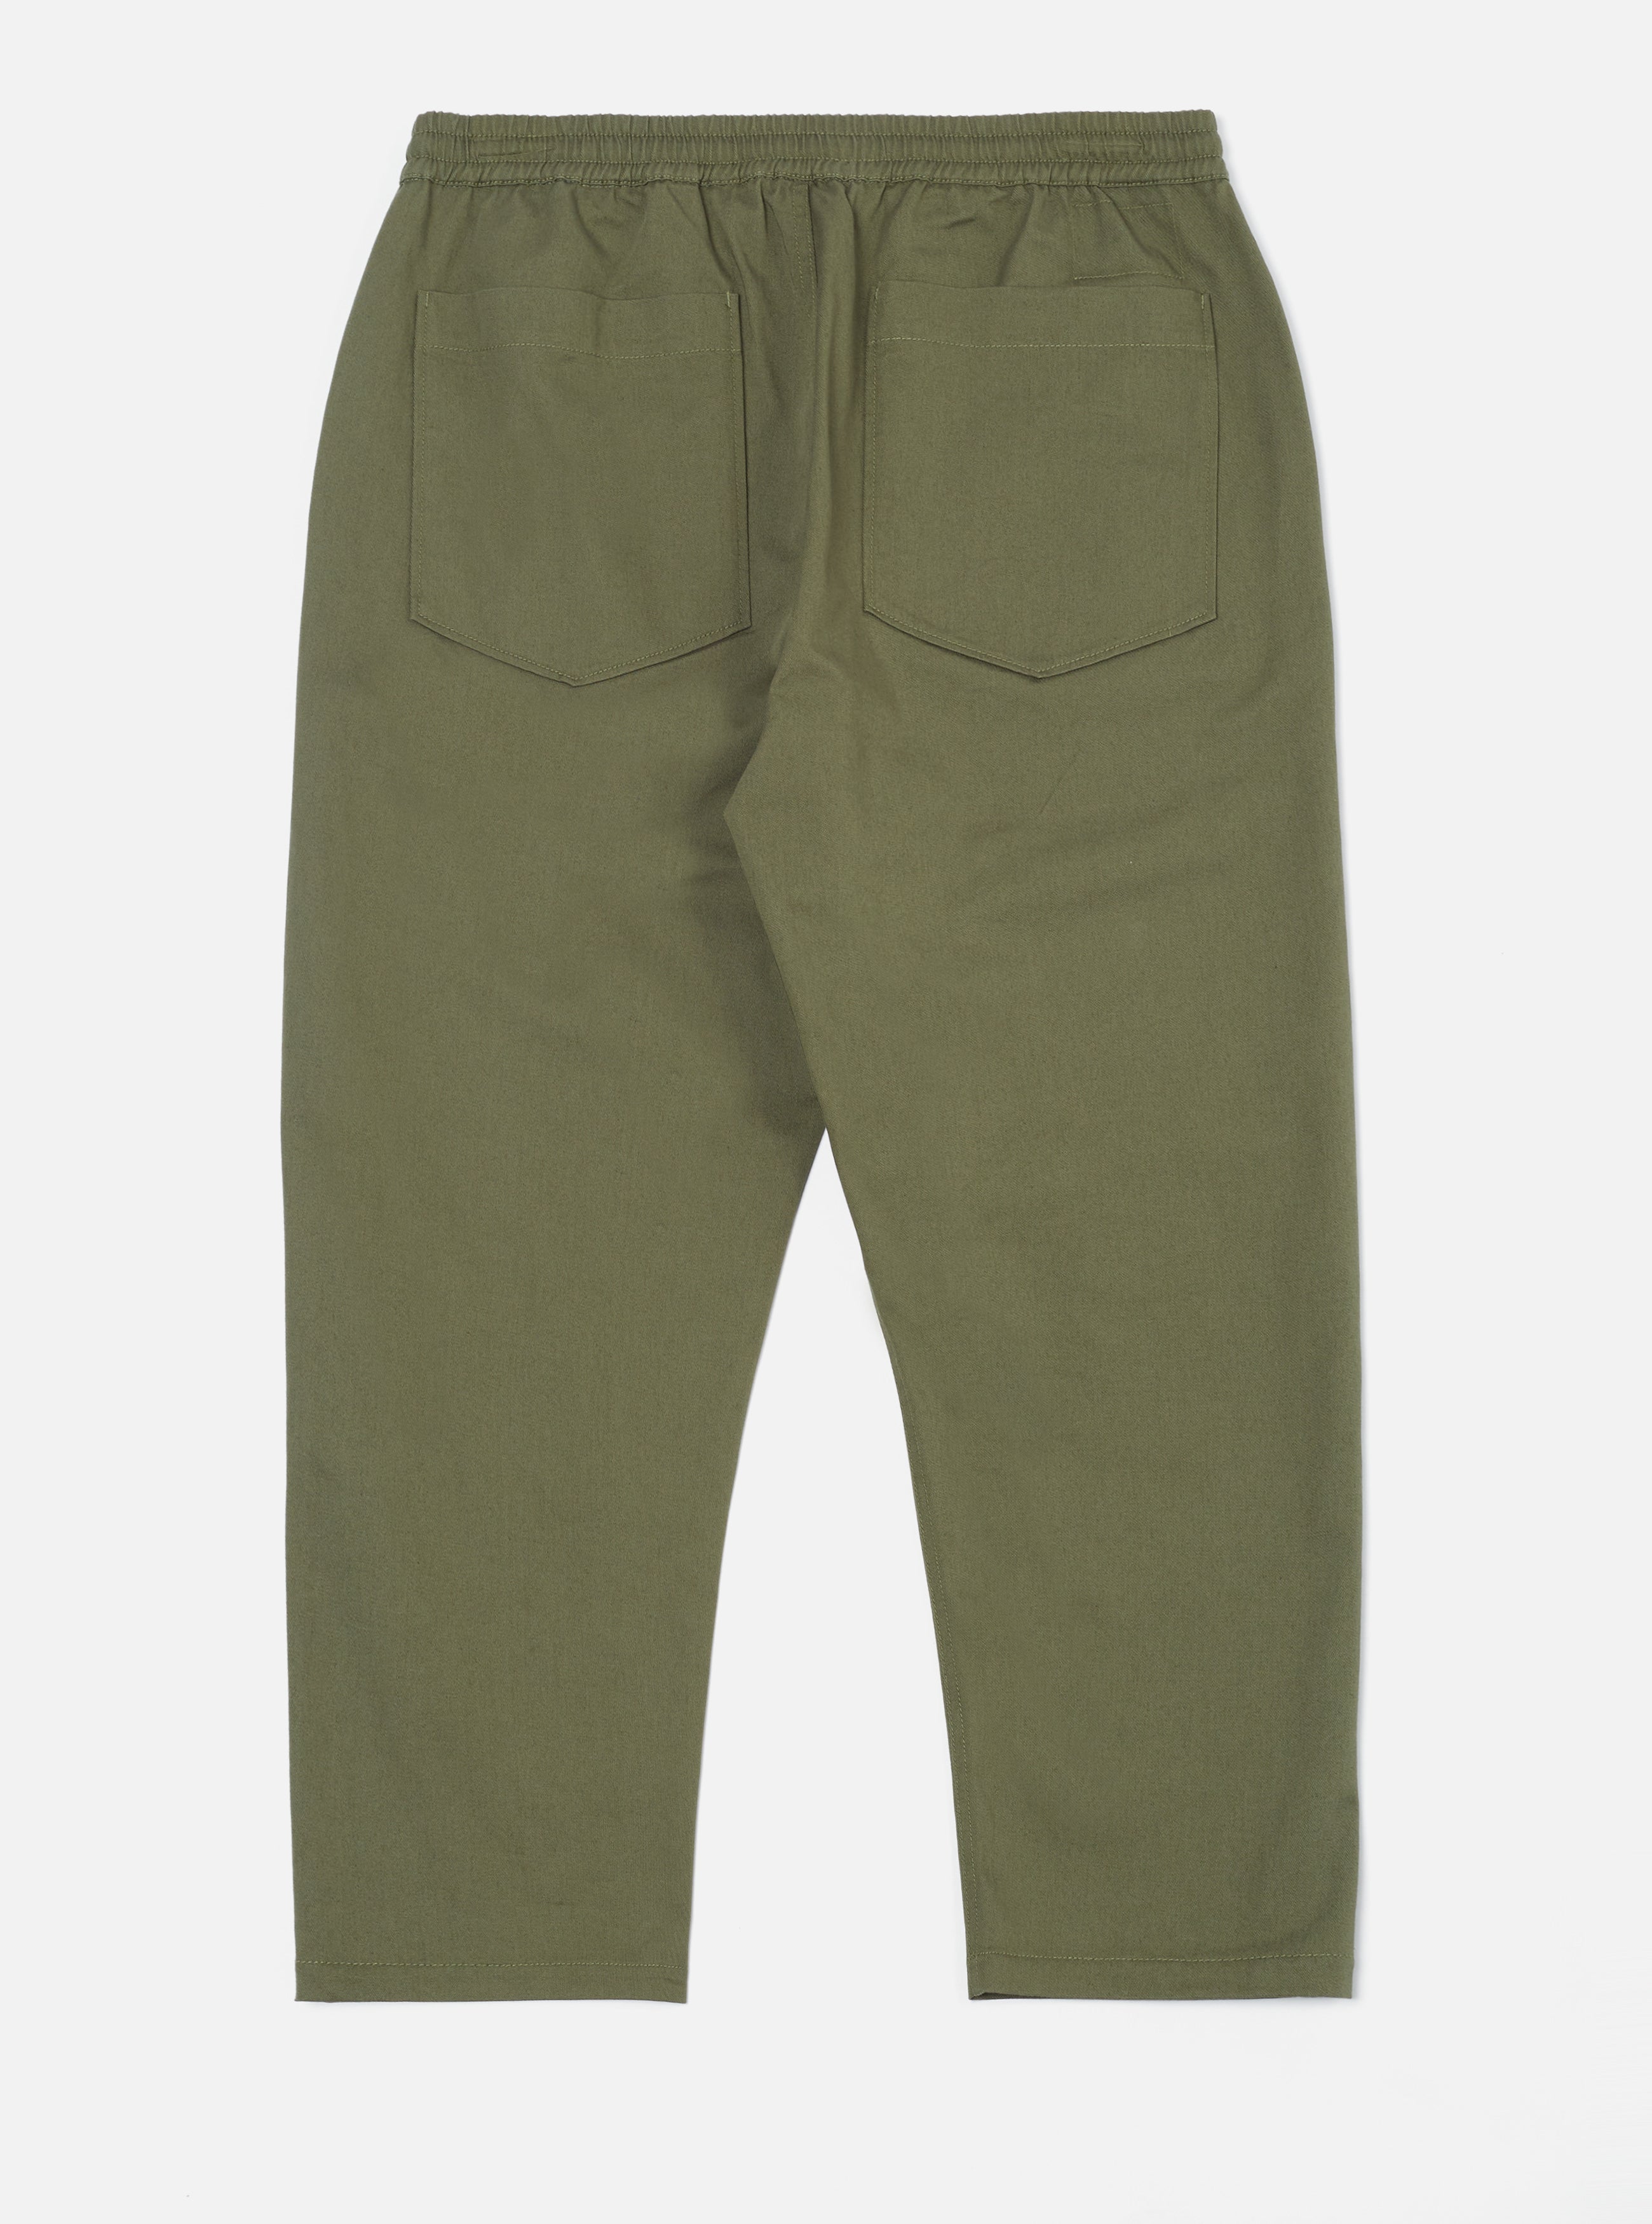 Universal Works Hi Water Trouser in Light Olive Twill